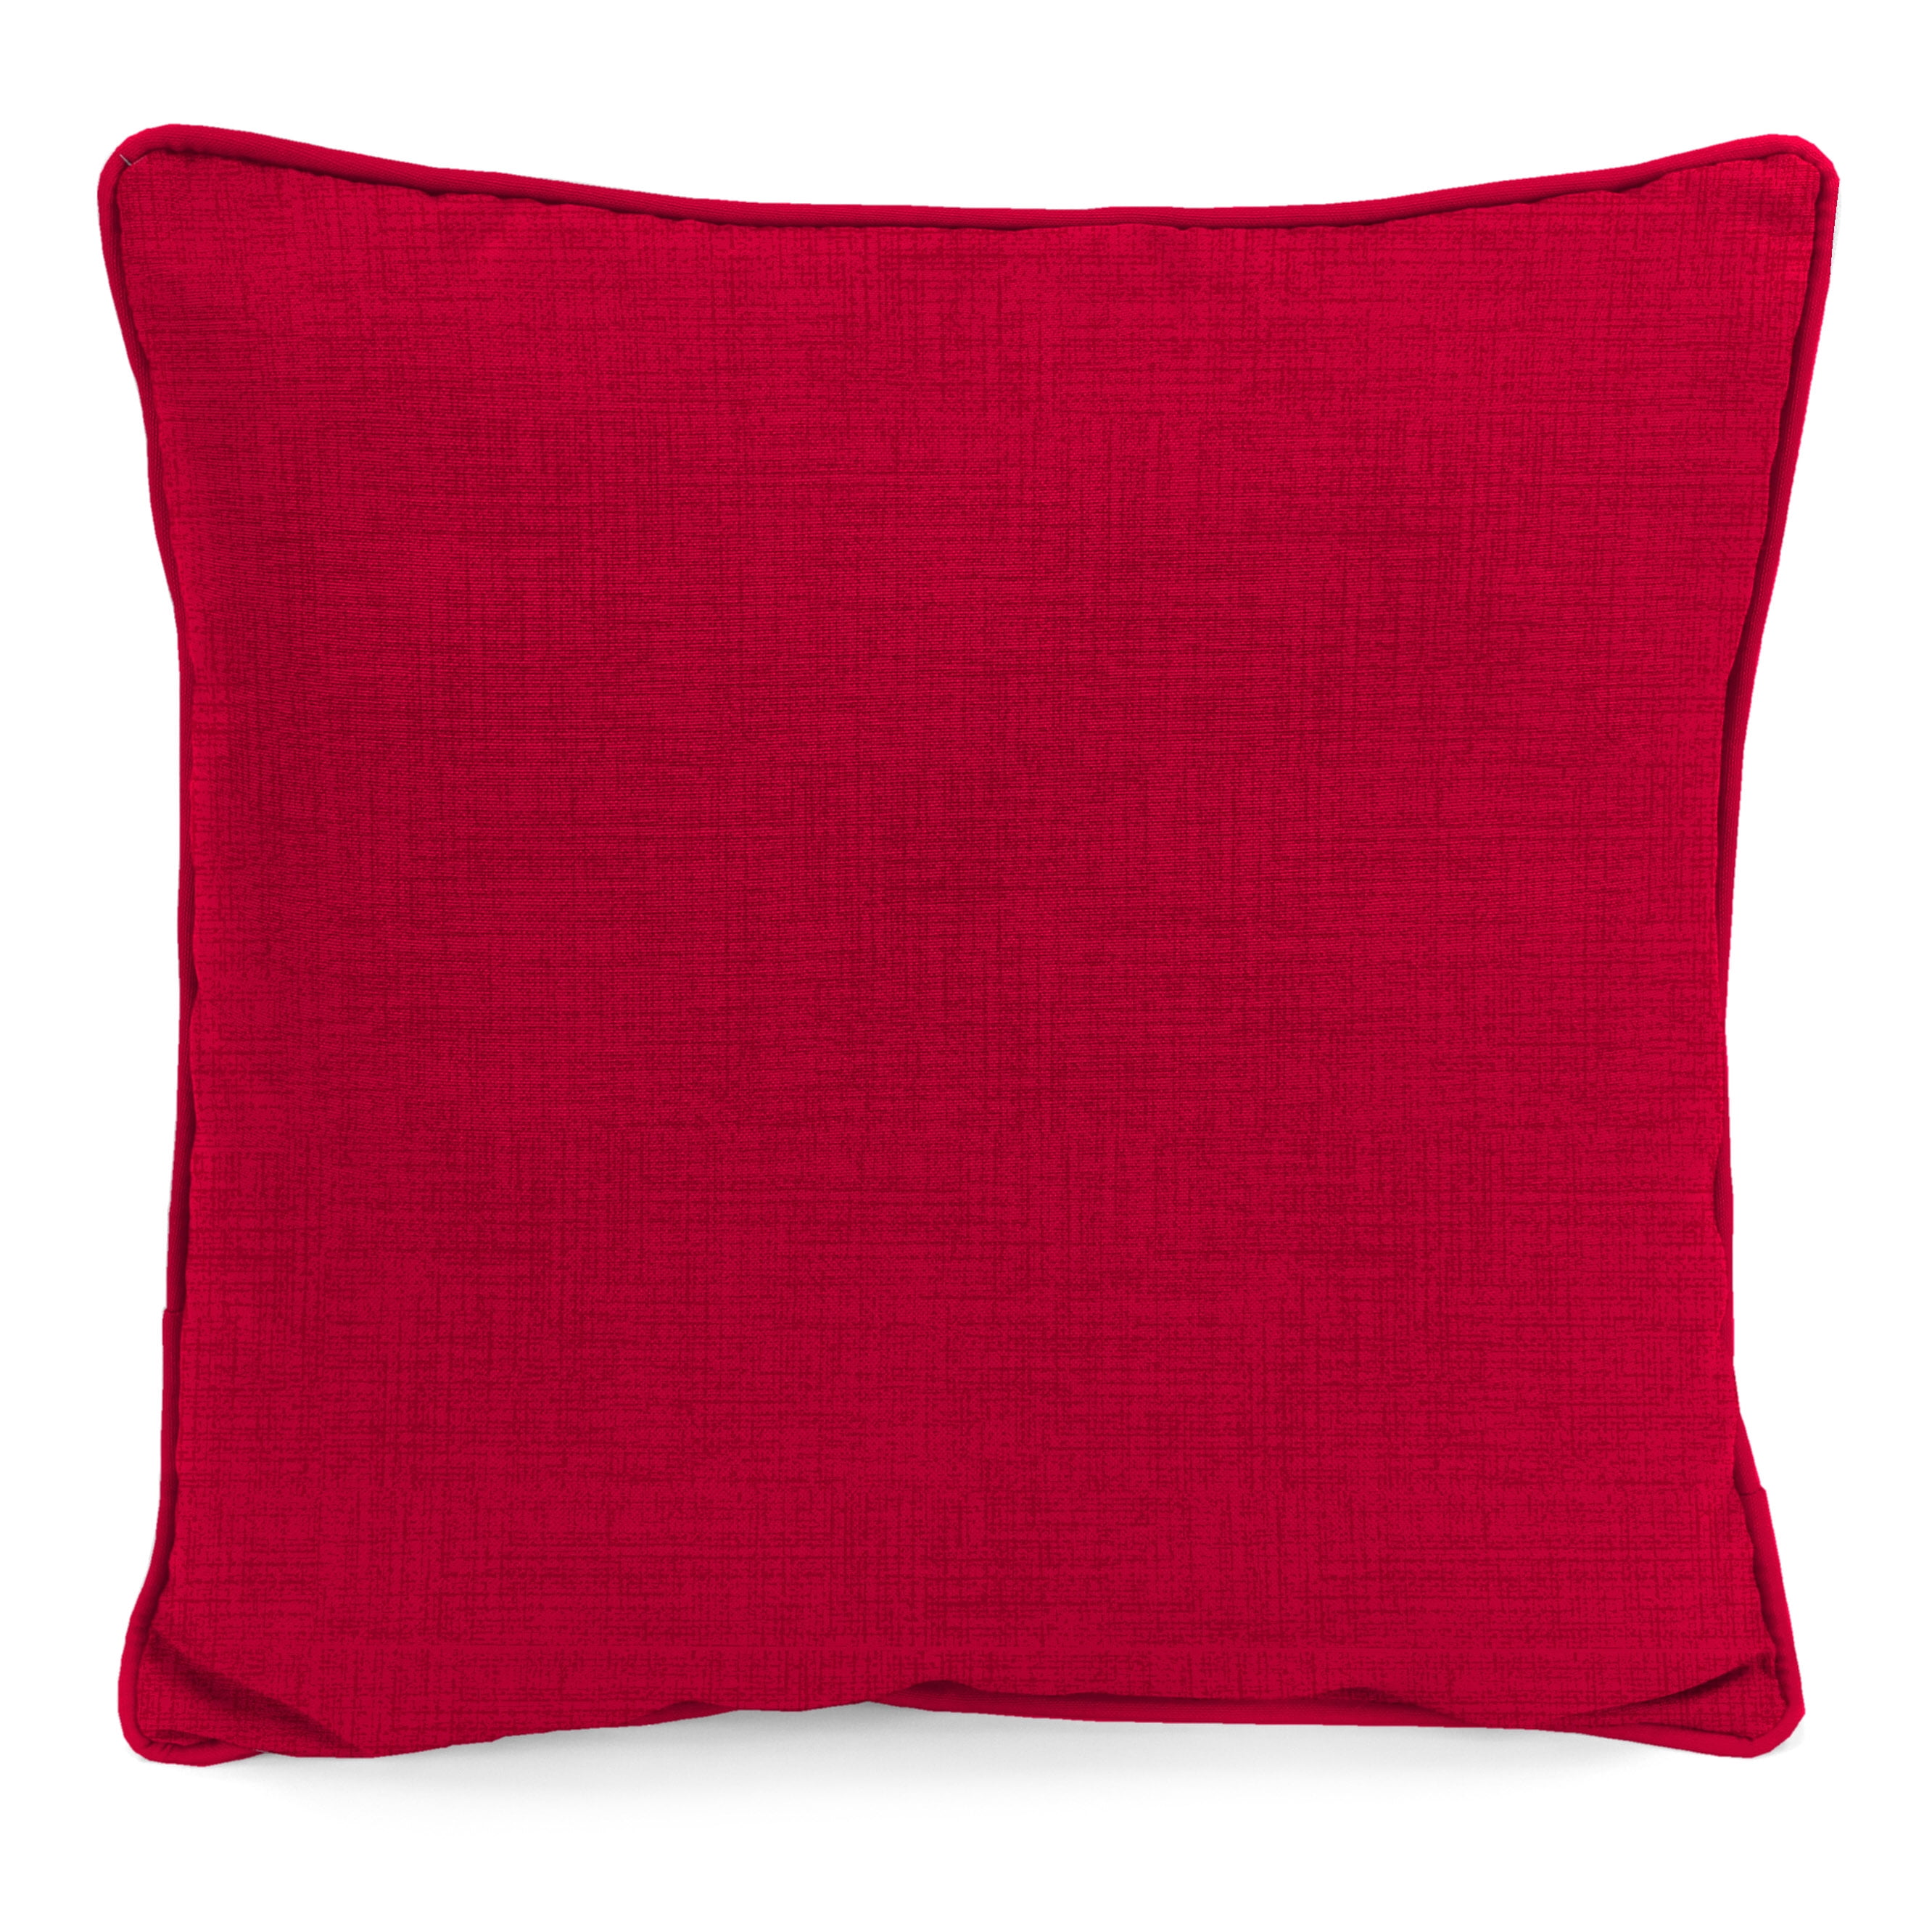 Mainstays Outdoor Throw Pillow, 16, Really Red Solid 